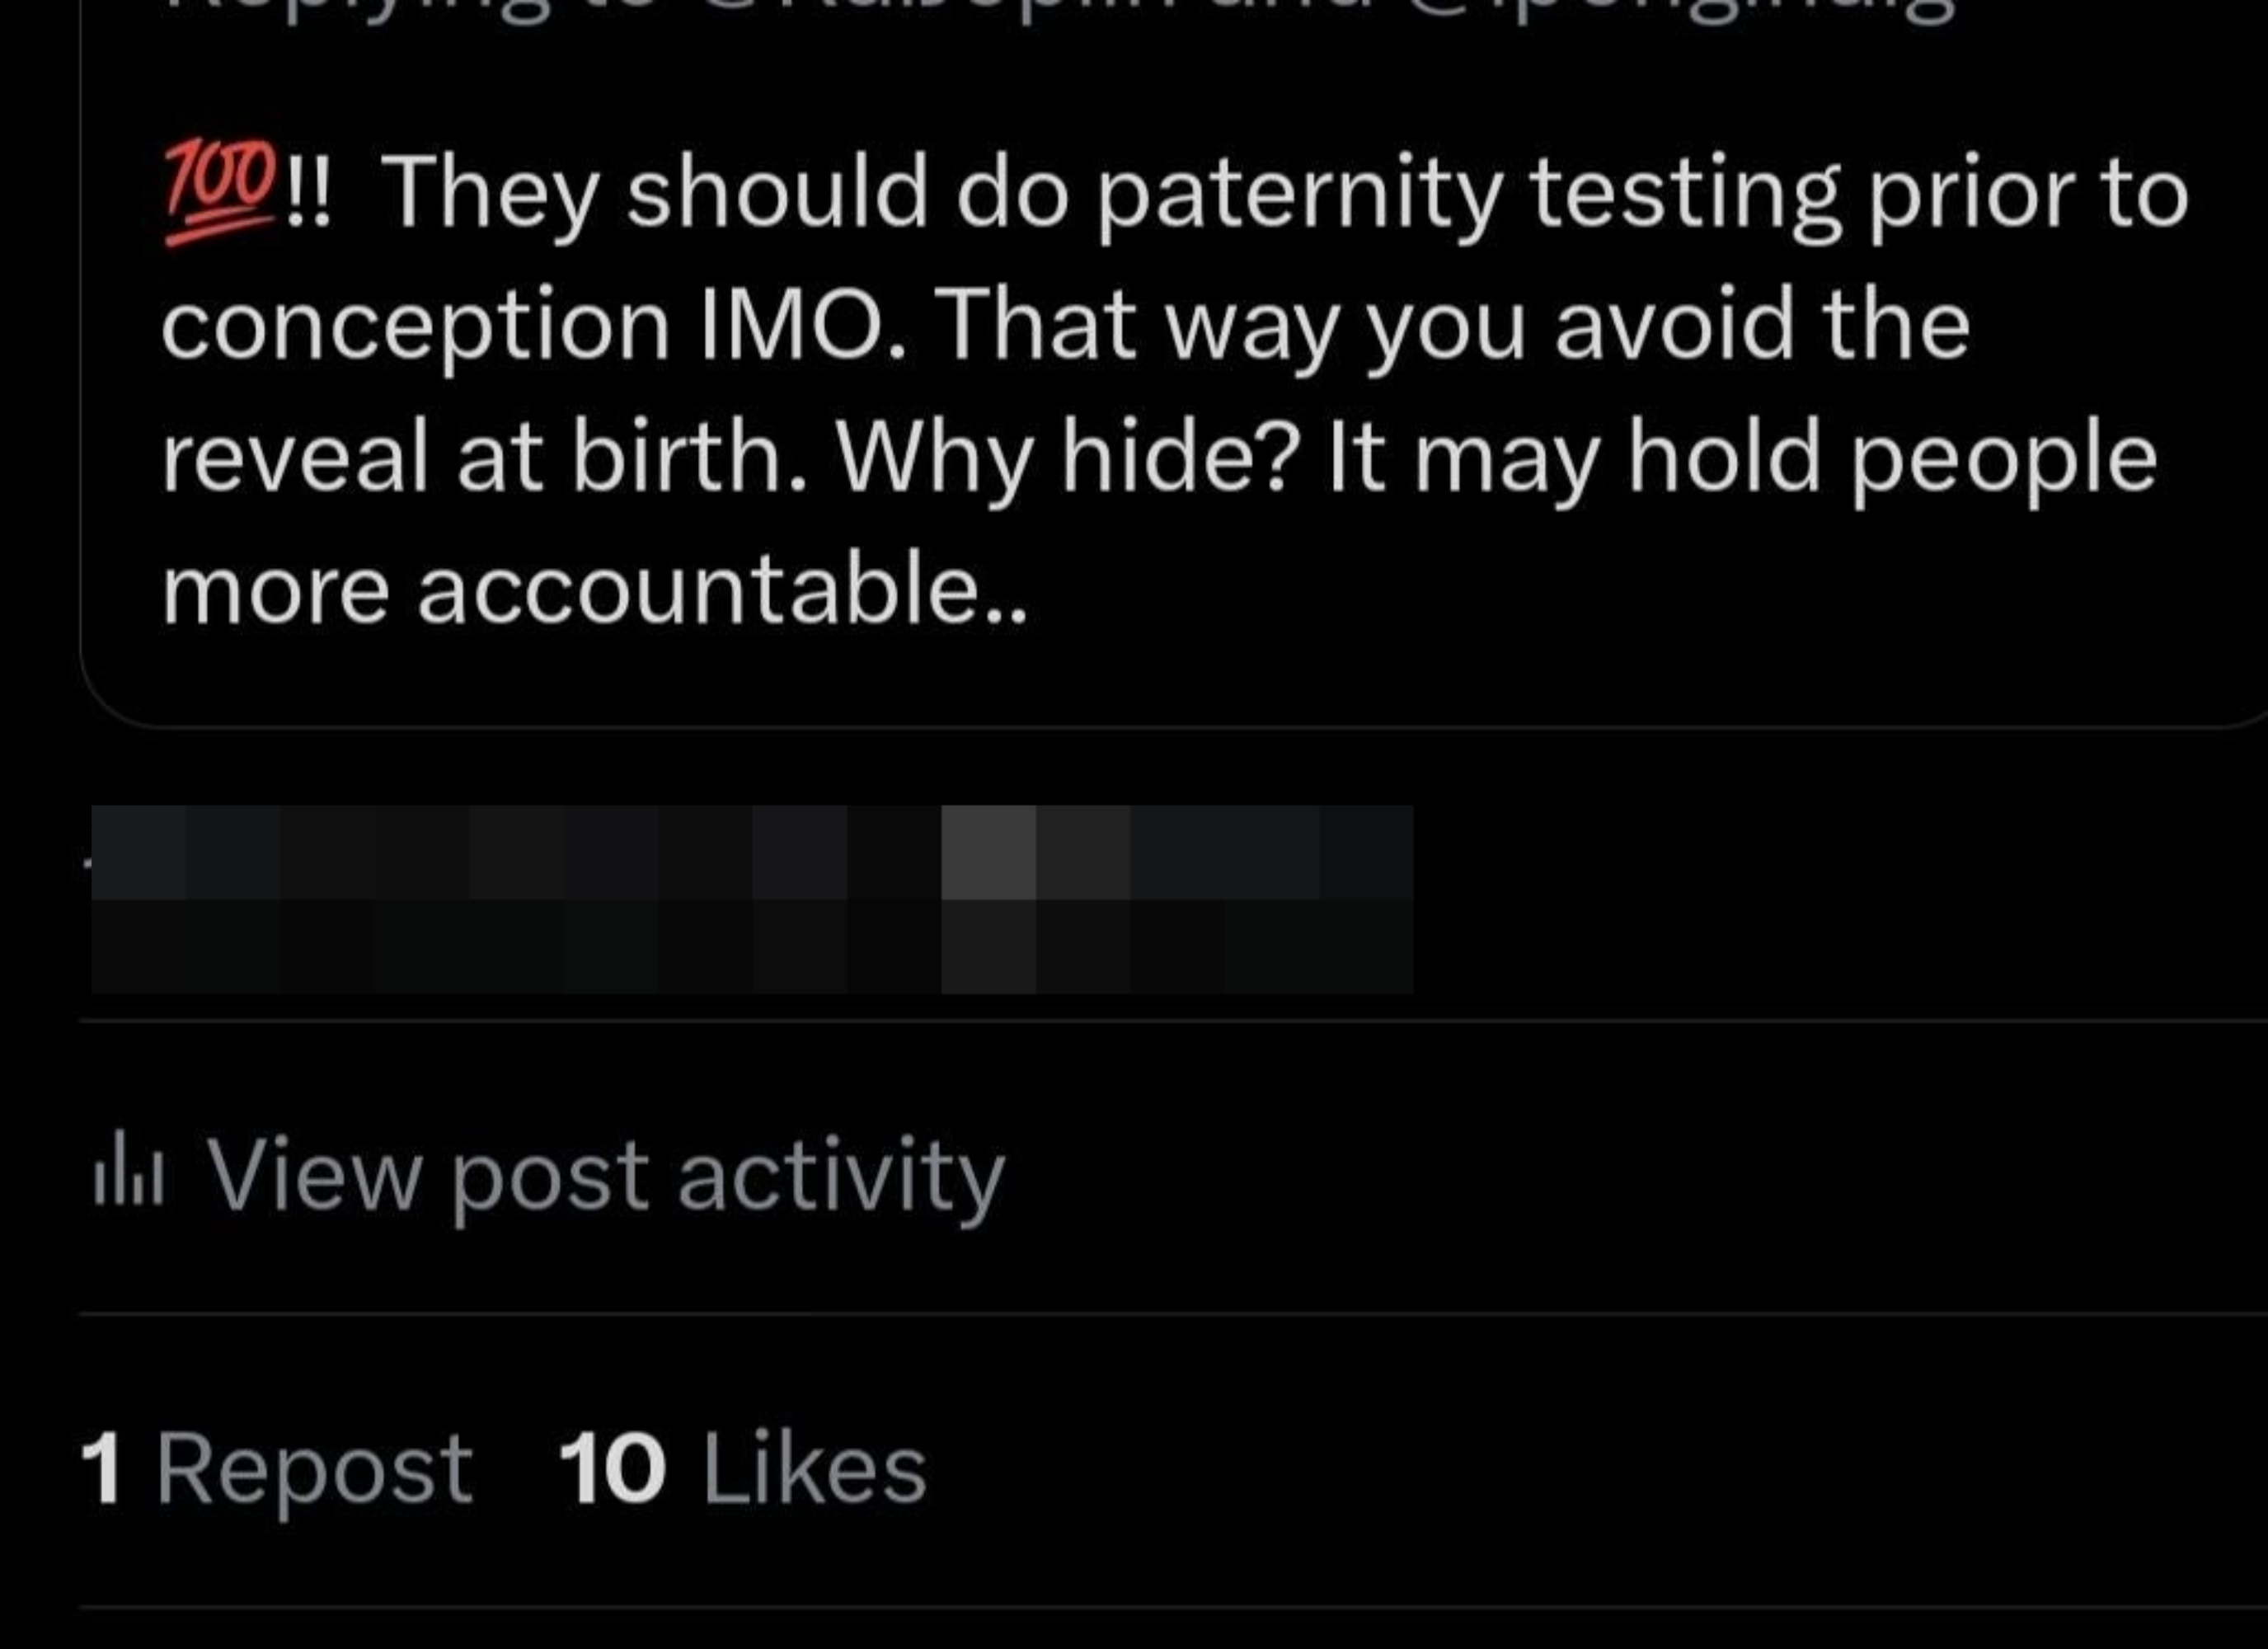 &quot;They should do paternity testing prior to conception IMO; that way you avoid the reveal at birth; why hide? It may hold people more accountable&quot;